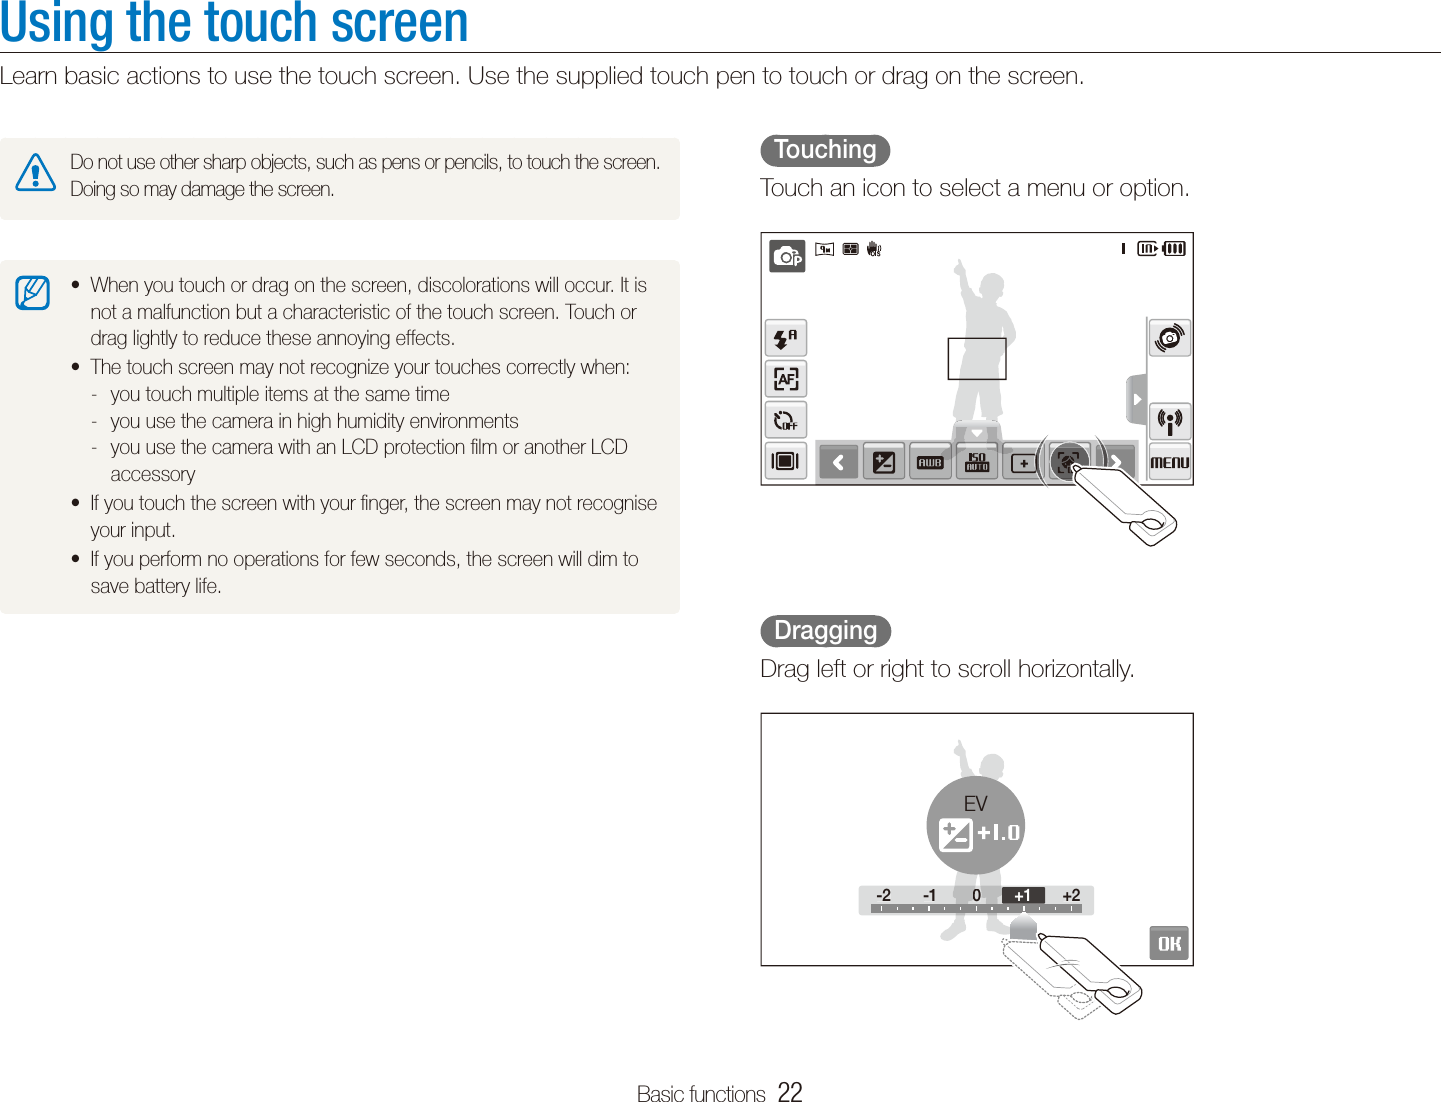 Basic functions  22Using the touch screenLearn basic actions to use the touch screen. Use the supplied touch pen to touch or drag on the screen.  Touching  Touch an icon to select a menu or option.  Dragging  Drag left or right to scroll horizontally.-2 -1 0 +2-2 -100+2+1EVDo not use other sharp objects, such as pens or pencils, to touch the screen. Doing so may damage the screen.When you touch or drag on the screen, discolorations will occur. It is tnot a malfunction but a characteristic of the touch screen. Touch or drag lightly to reduce these annoying effects.The touch screen may not recognize your touches correctly when:tyou touch multiple items at the same time -you use the camera in high humidity environments -you use the camera with an LCD protection ﬁlm or another LCD  -accessoryIf you touch the screen with your ﬁnger, the screen may not recognise tyour input.If you perform no operations for few seconds, the screen will dim to tsave battery life.